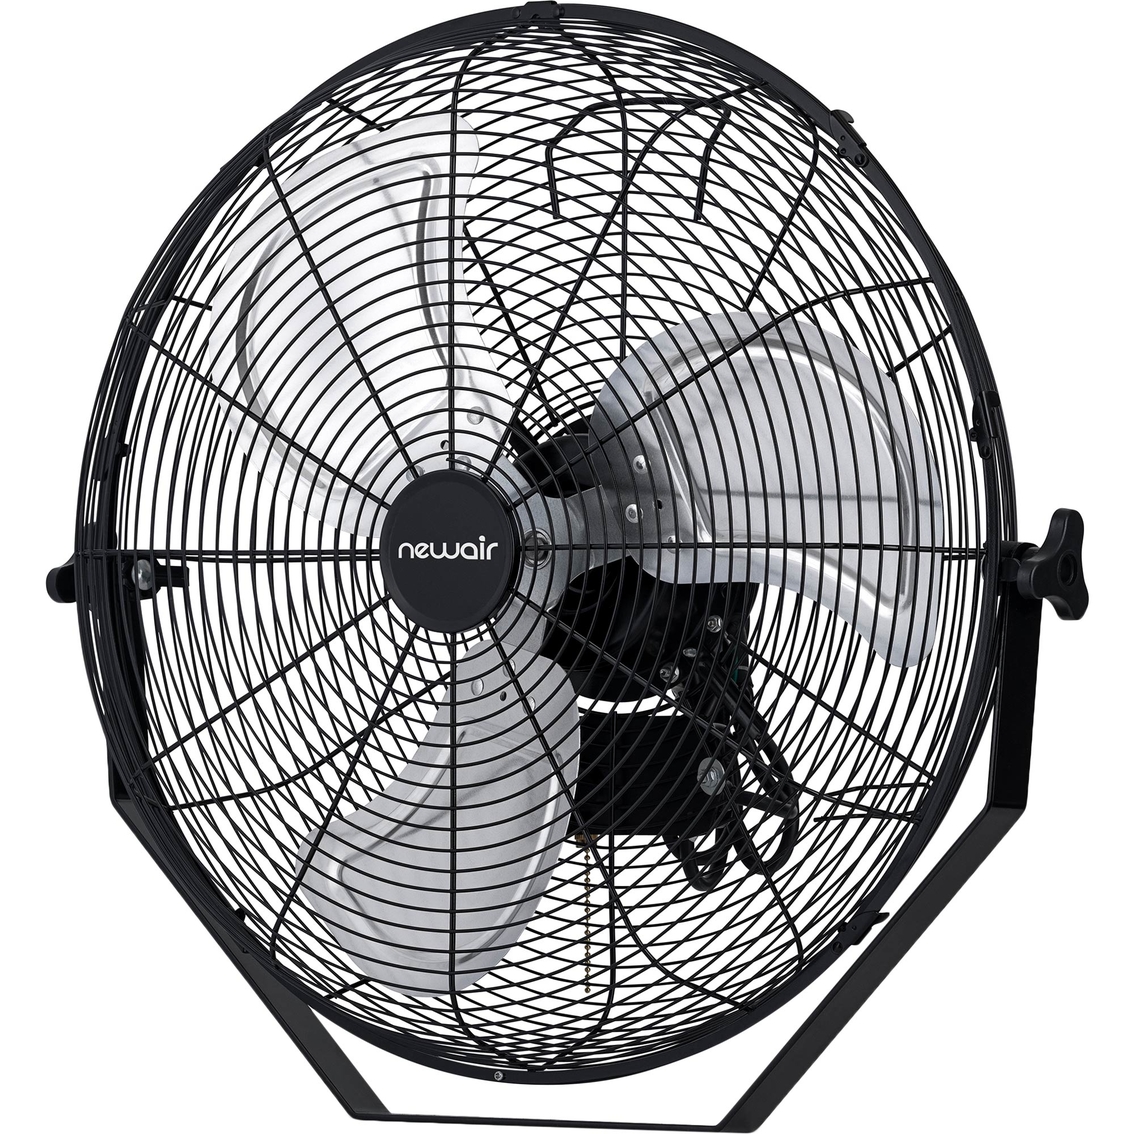 NewAir 20 in. Outdoor Rated High Velocity Wall Mounted Fan - Image 6 of 10